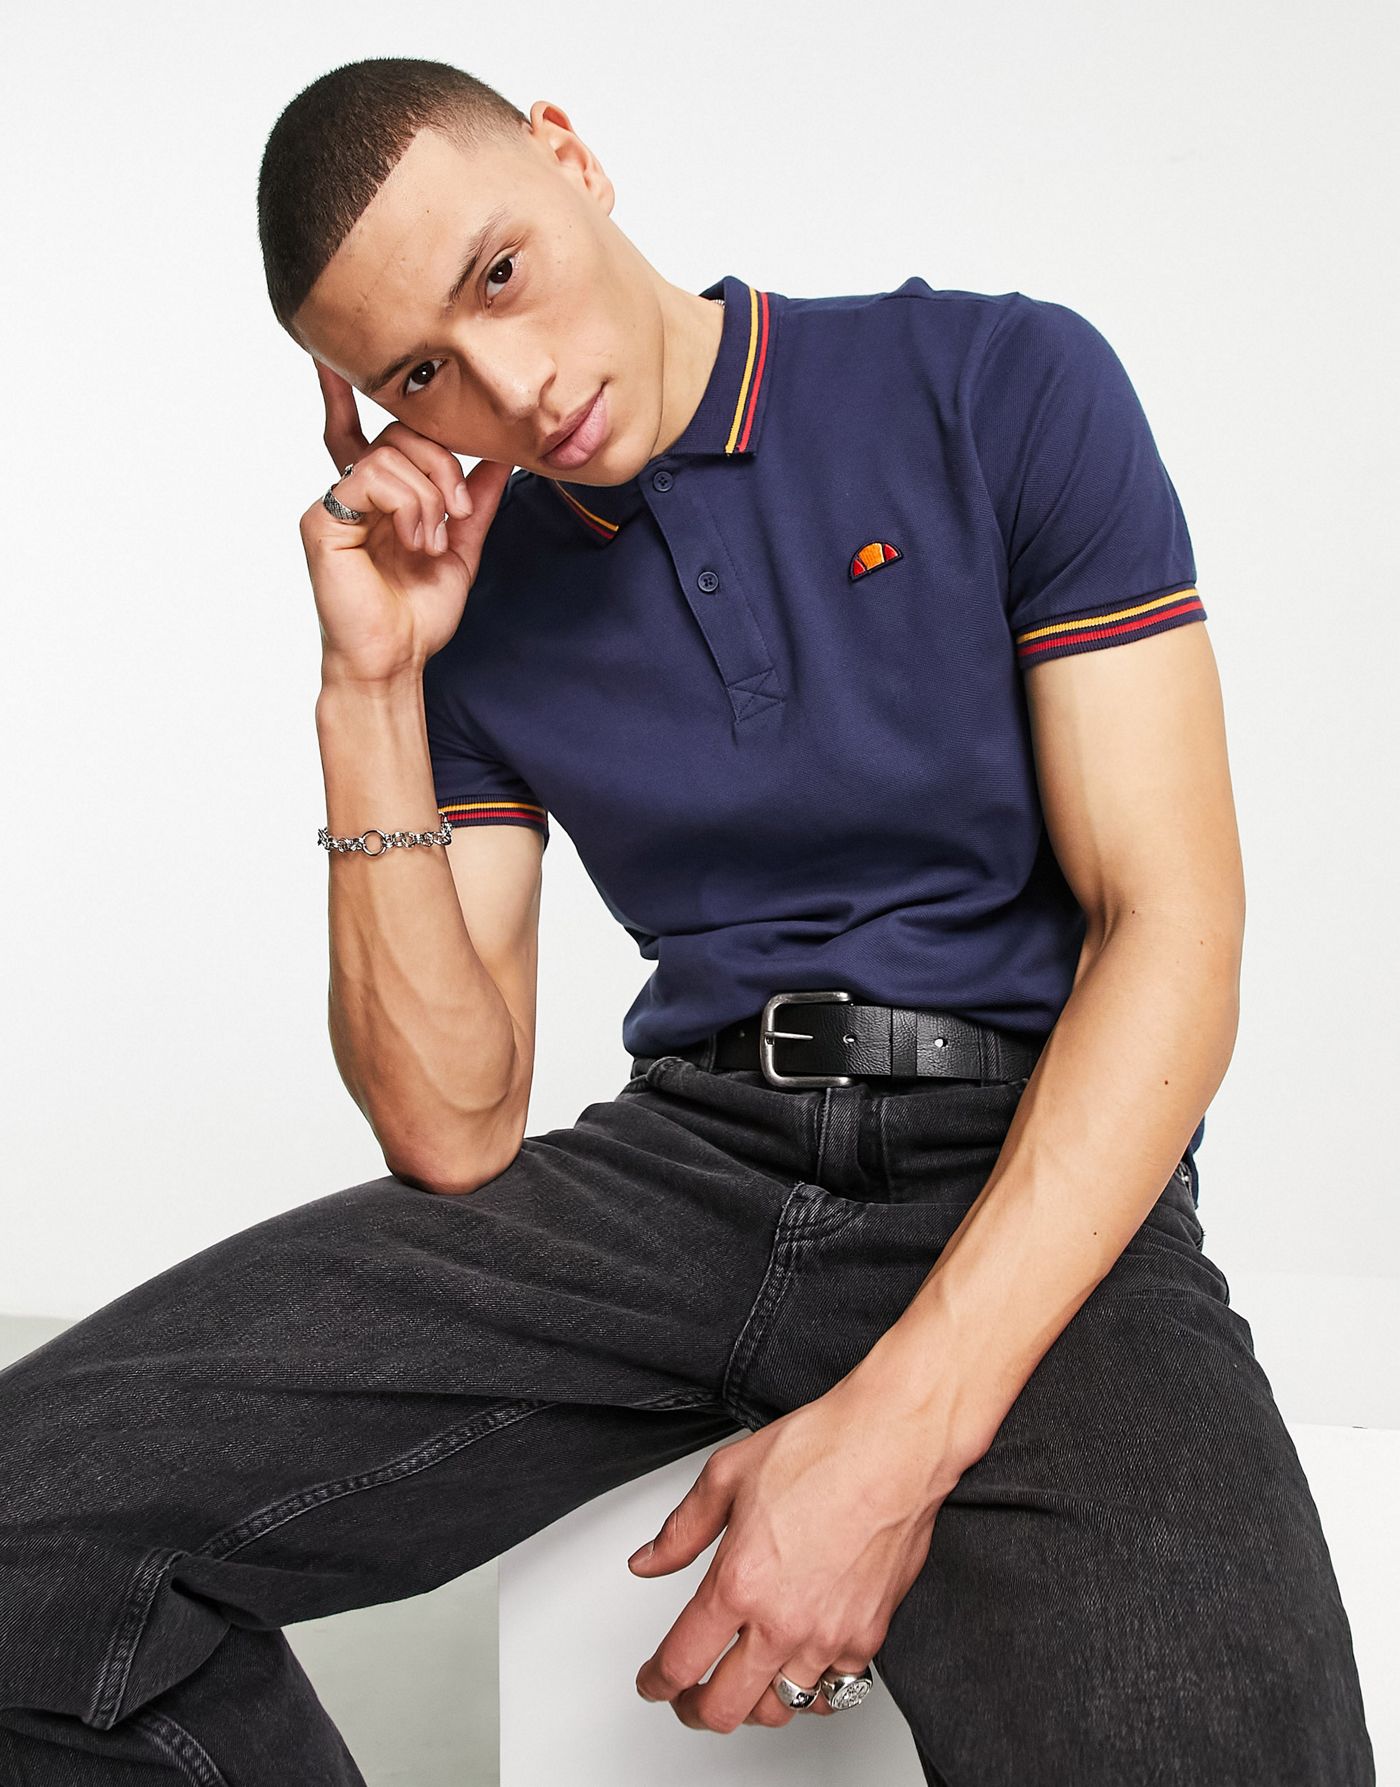 ellesse Rooks polo shirt with pipe collar in navy